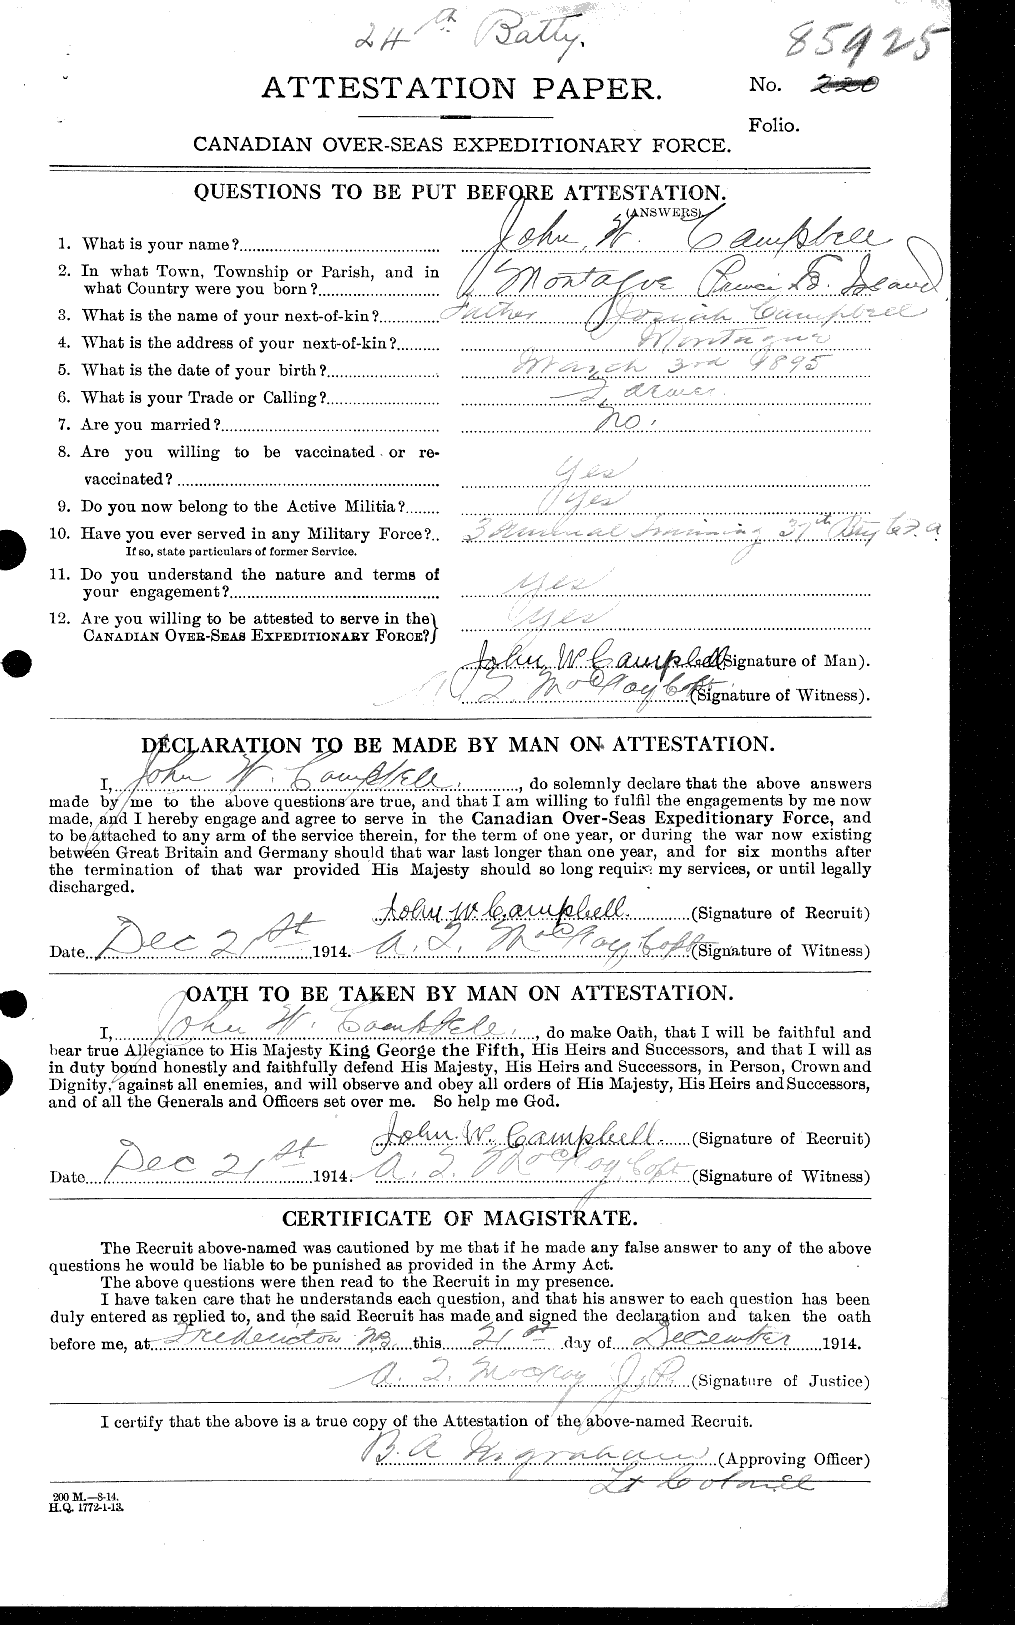 Personnel Records of the First World War - CEF 003803a